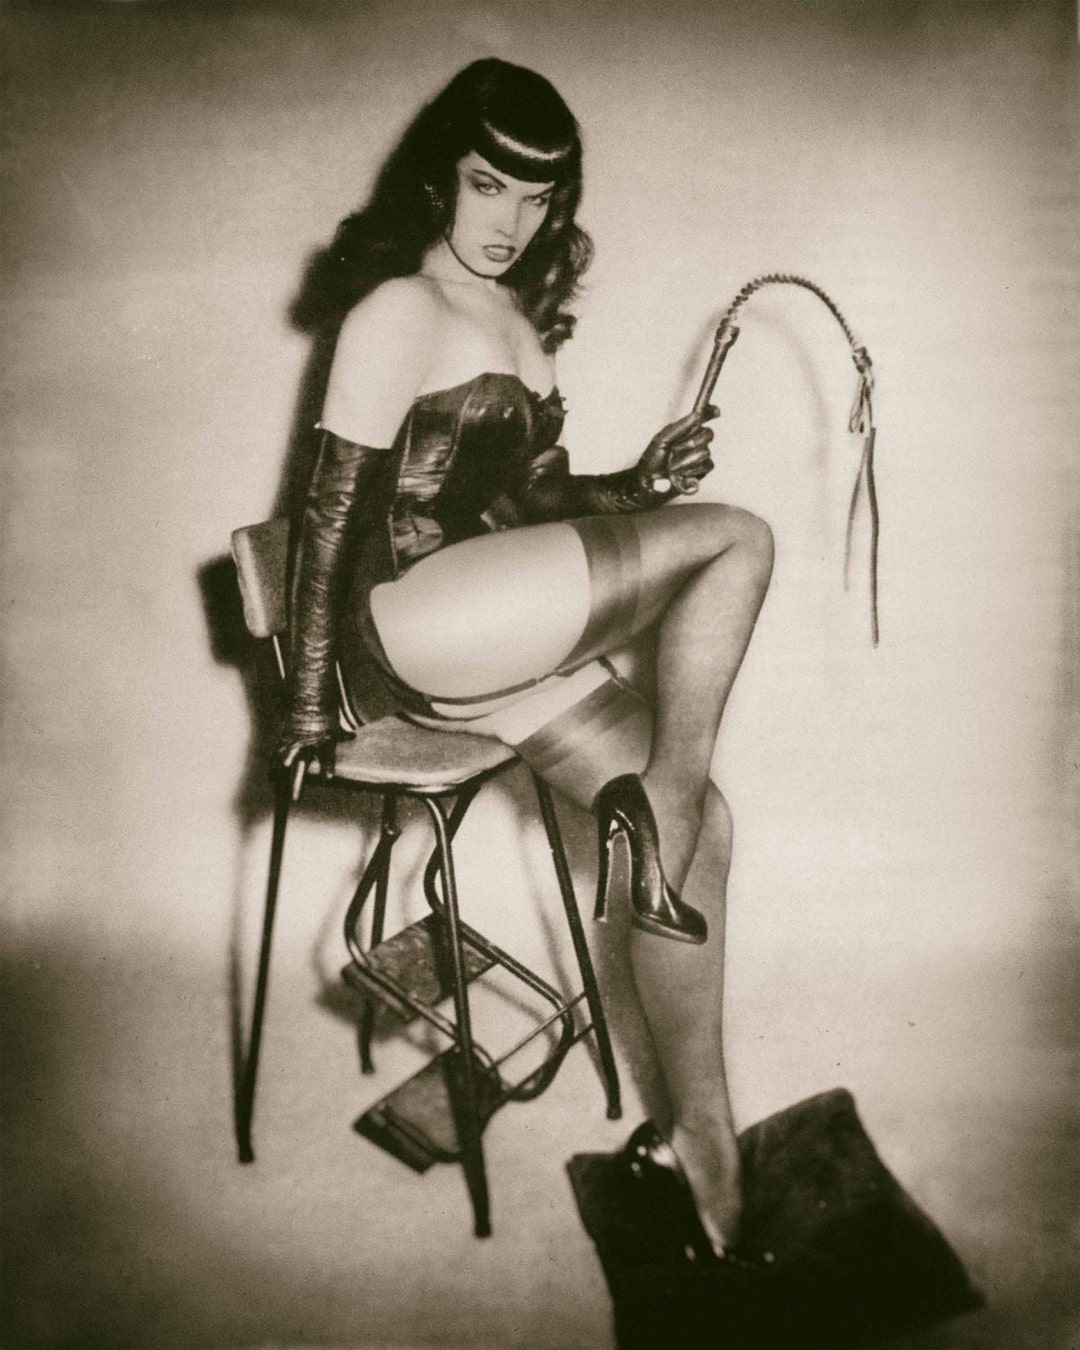 1940s housewife fetish